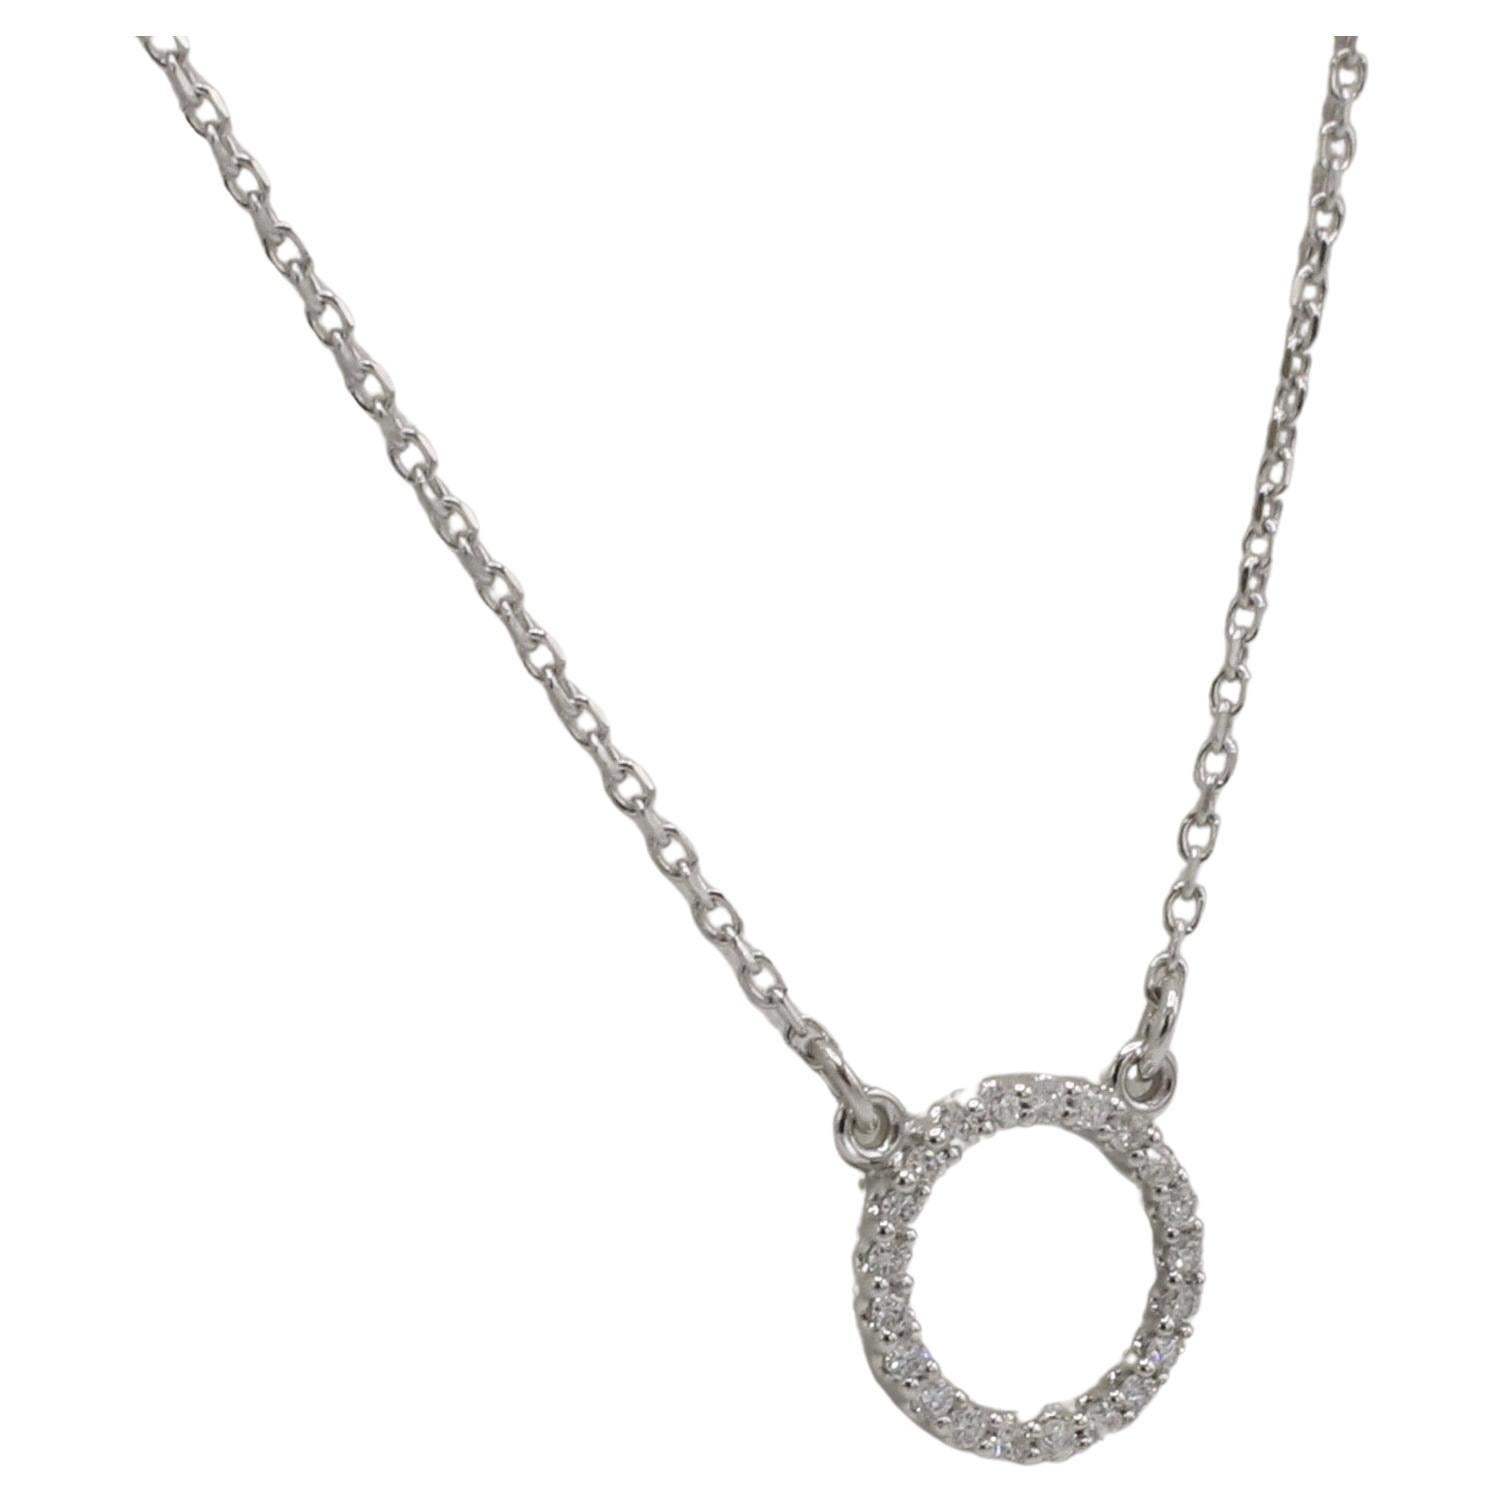 14 Karat White Gold Natural Diamond Circle Pendant Necklace 
Metal: 14k white gold
Weight: 1.47 grams
Diamonds: .08 CTW natural round diamonds G-H SI
Length: 16 inches
Circle: 9mm
Note: Also available in yellow and rose gold 